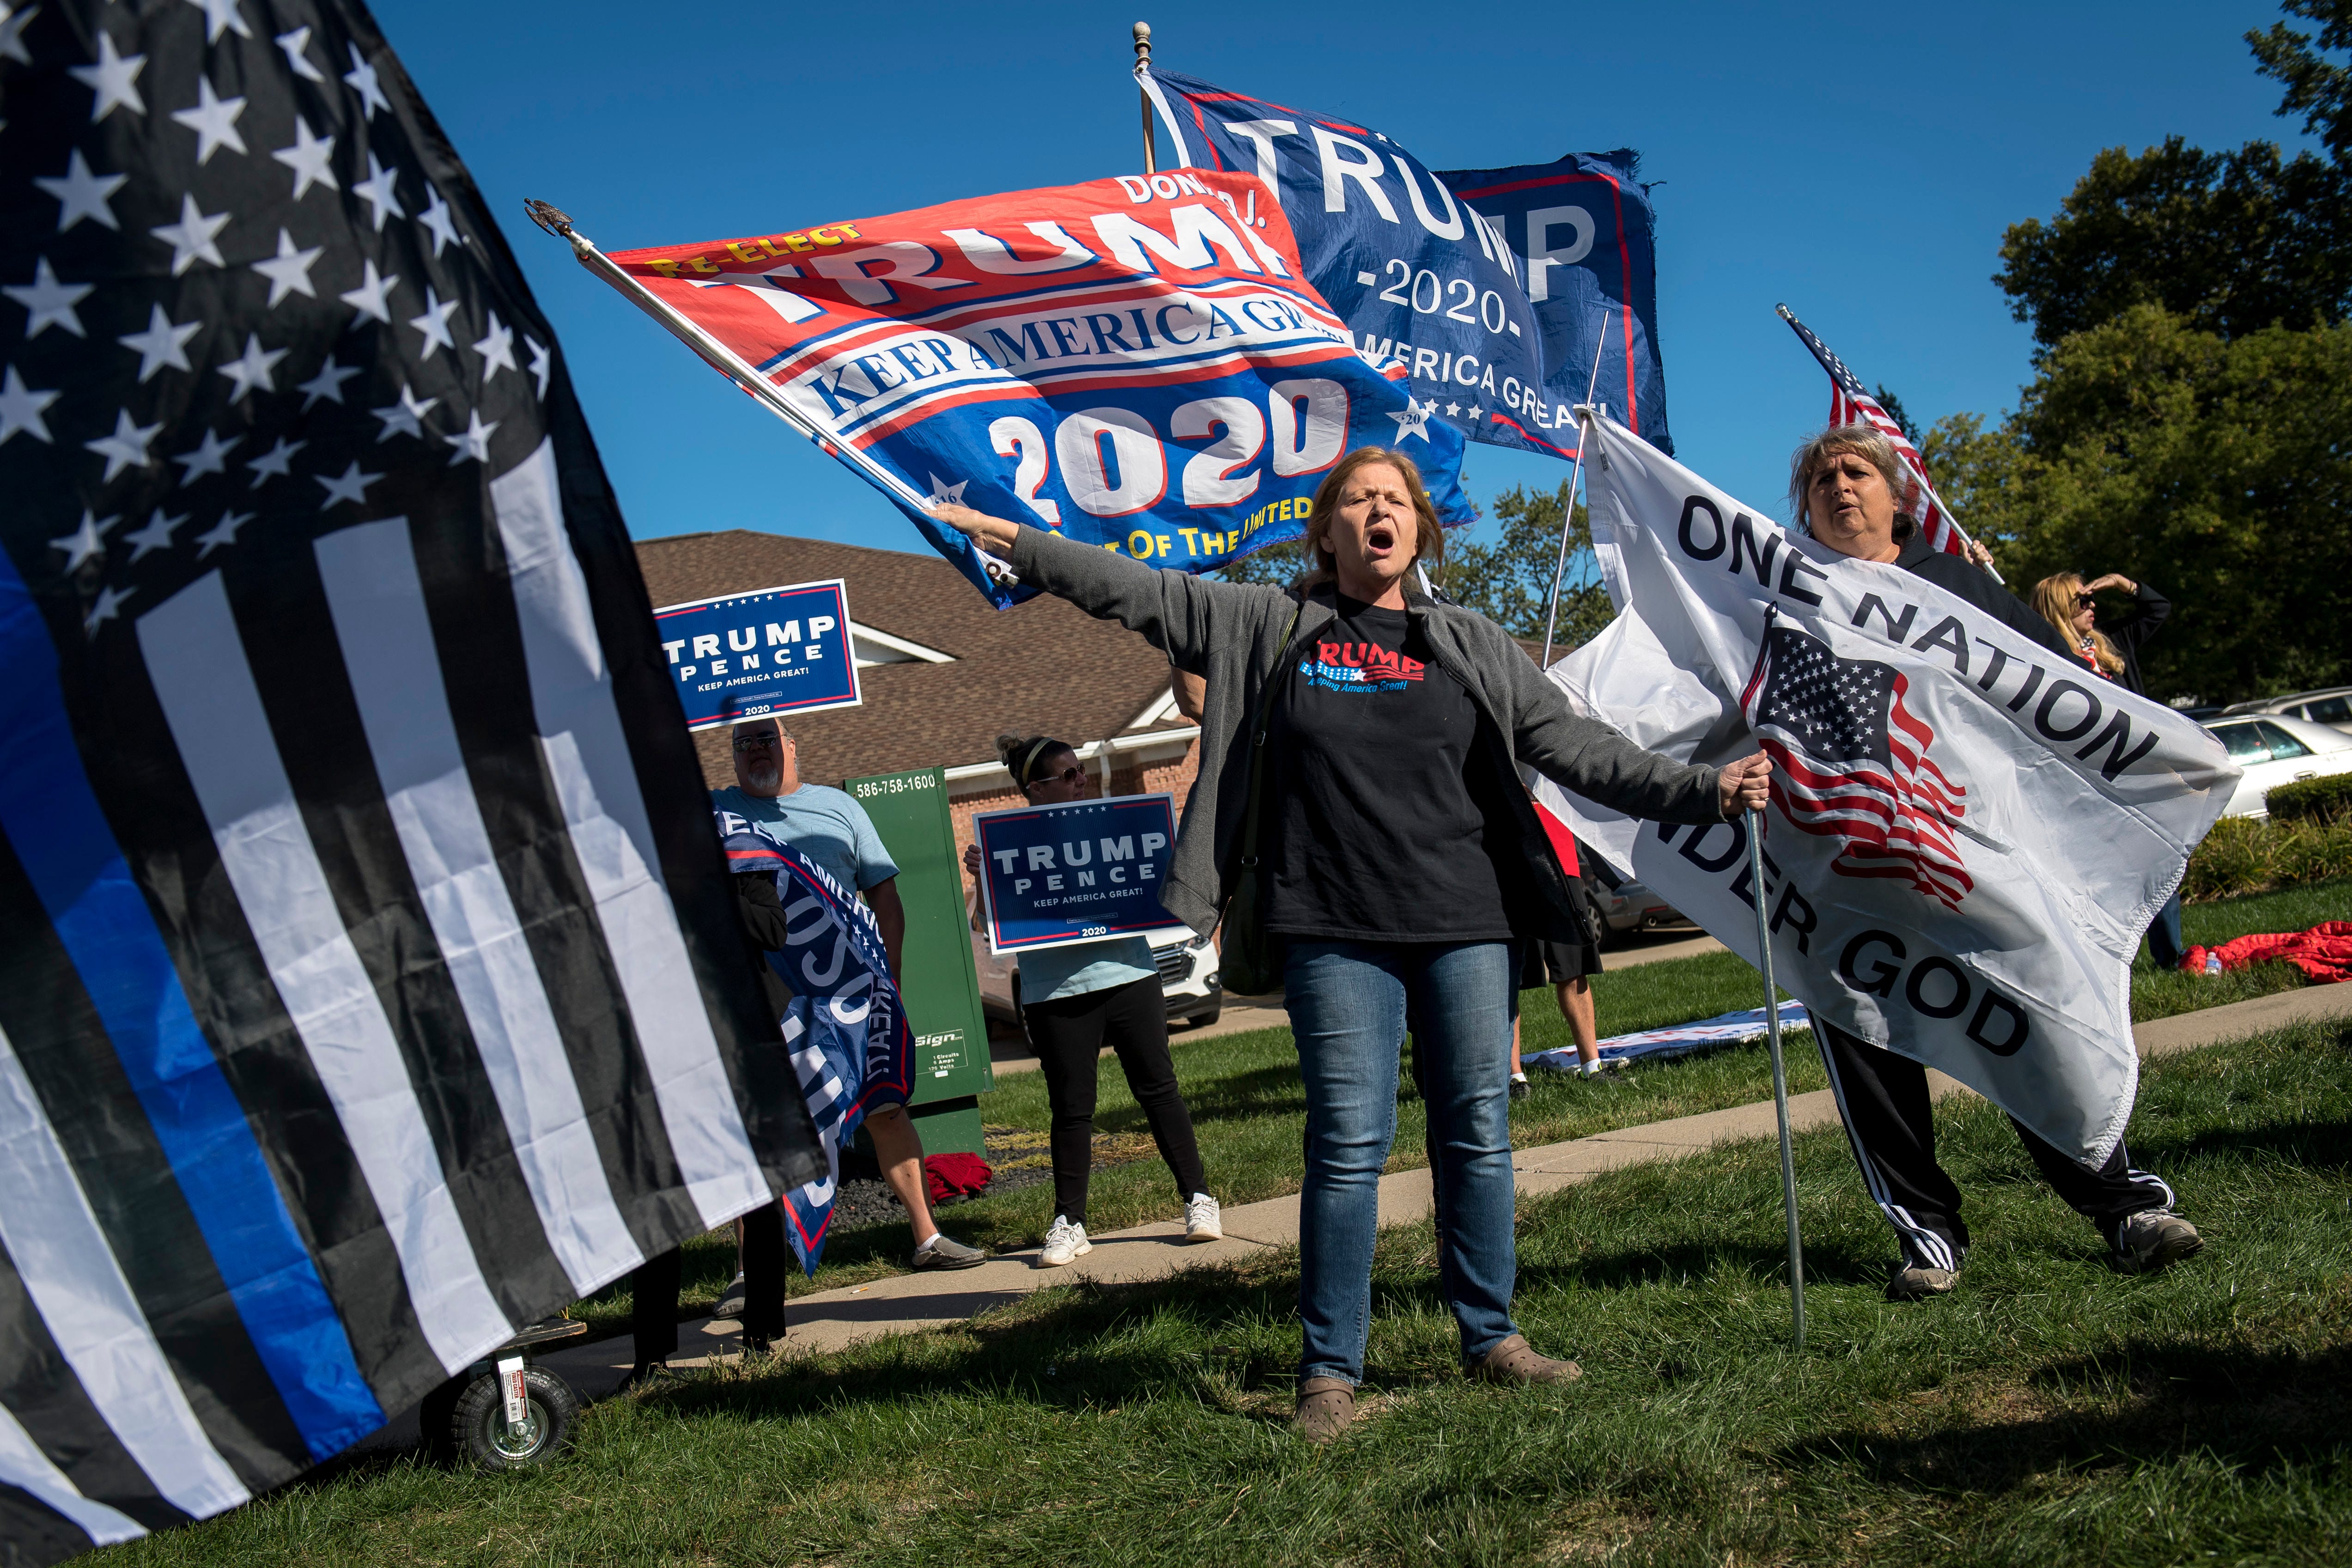 Trump supporters counter protest before the March Against Racism in Warren on Sept. 19, 2020. The march in Warren occurred in response to the city called hate crimes against residents Candace Hall, her husband Eddie and their two children.